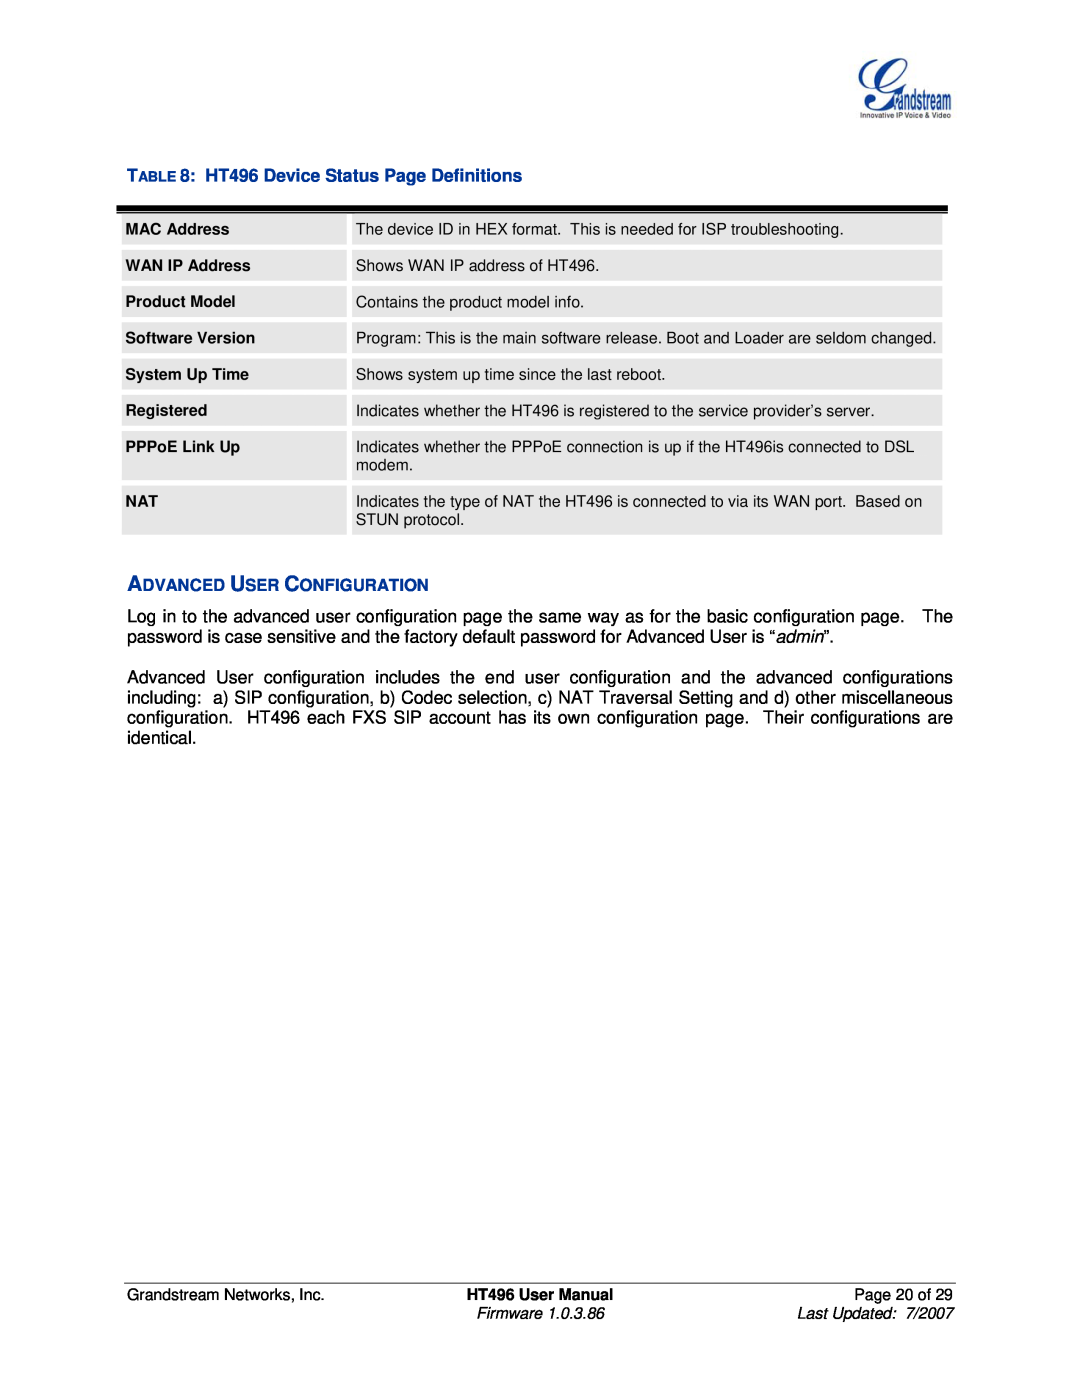 Grandstream Networks user manual HT496 Device Status Page Definitions, Advanced User Configuration 